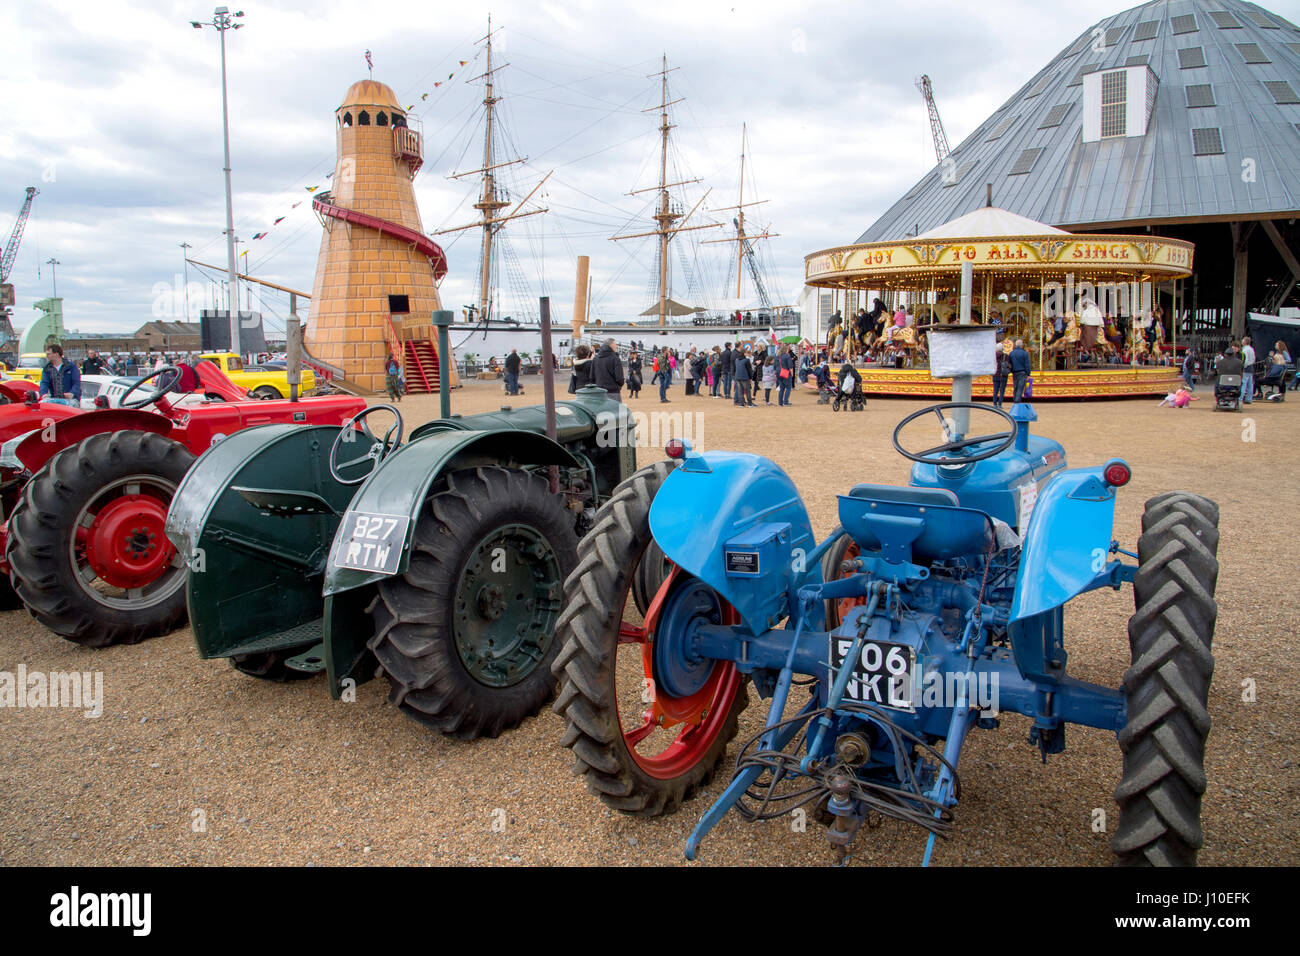 Chatham, Kent, UK. 16 April 2017. Hundreds of families came to see classic and vintage cars, trucks, steam engines and commerical vehicles and to ride vintage fairground attractions gathered at Chatham Historic Dockyard in Kent for the festival of Transport over the Easter weekend. Credit: Matthew Richardson/Alamy Live News Stock Photo